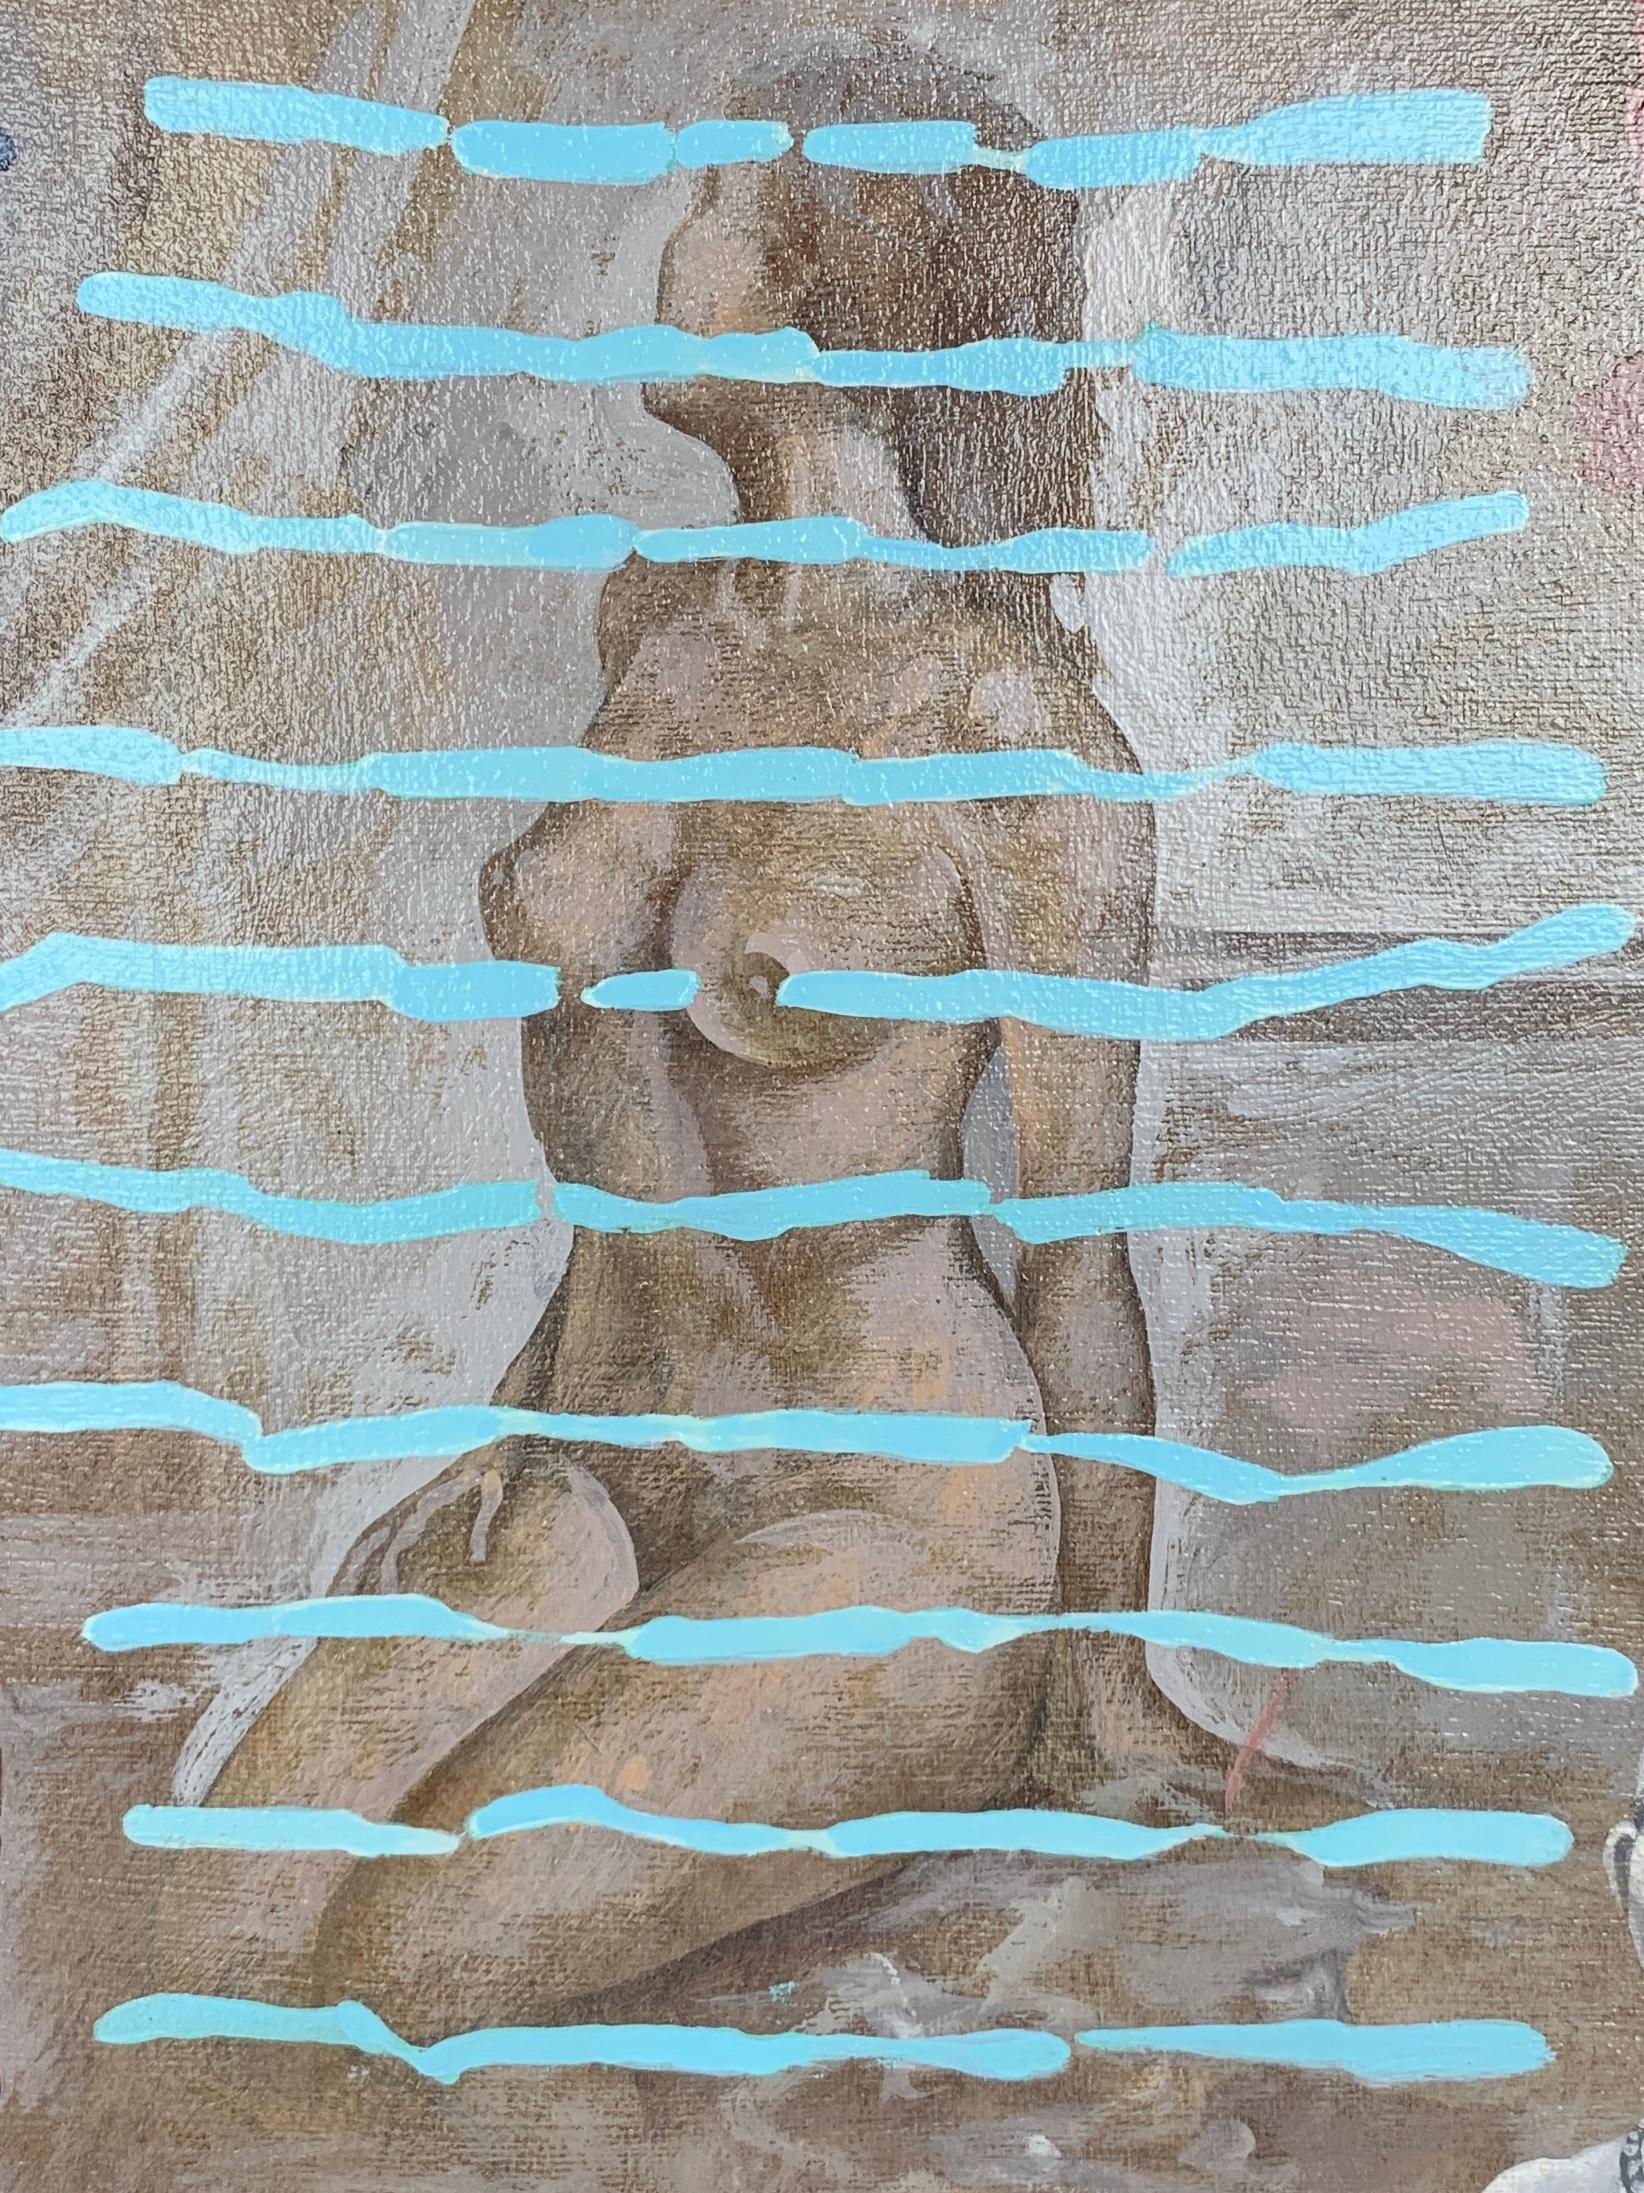 The Men of her Life-nude woman portrait made in beige, grey, turquoise color - Painting by Igor Fomin